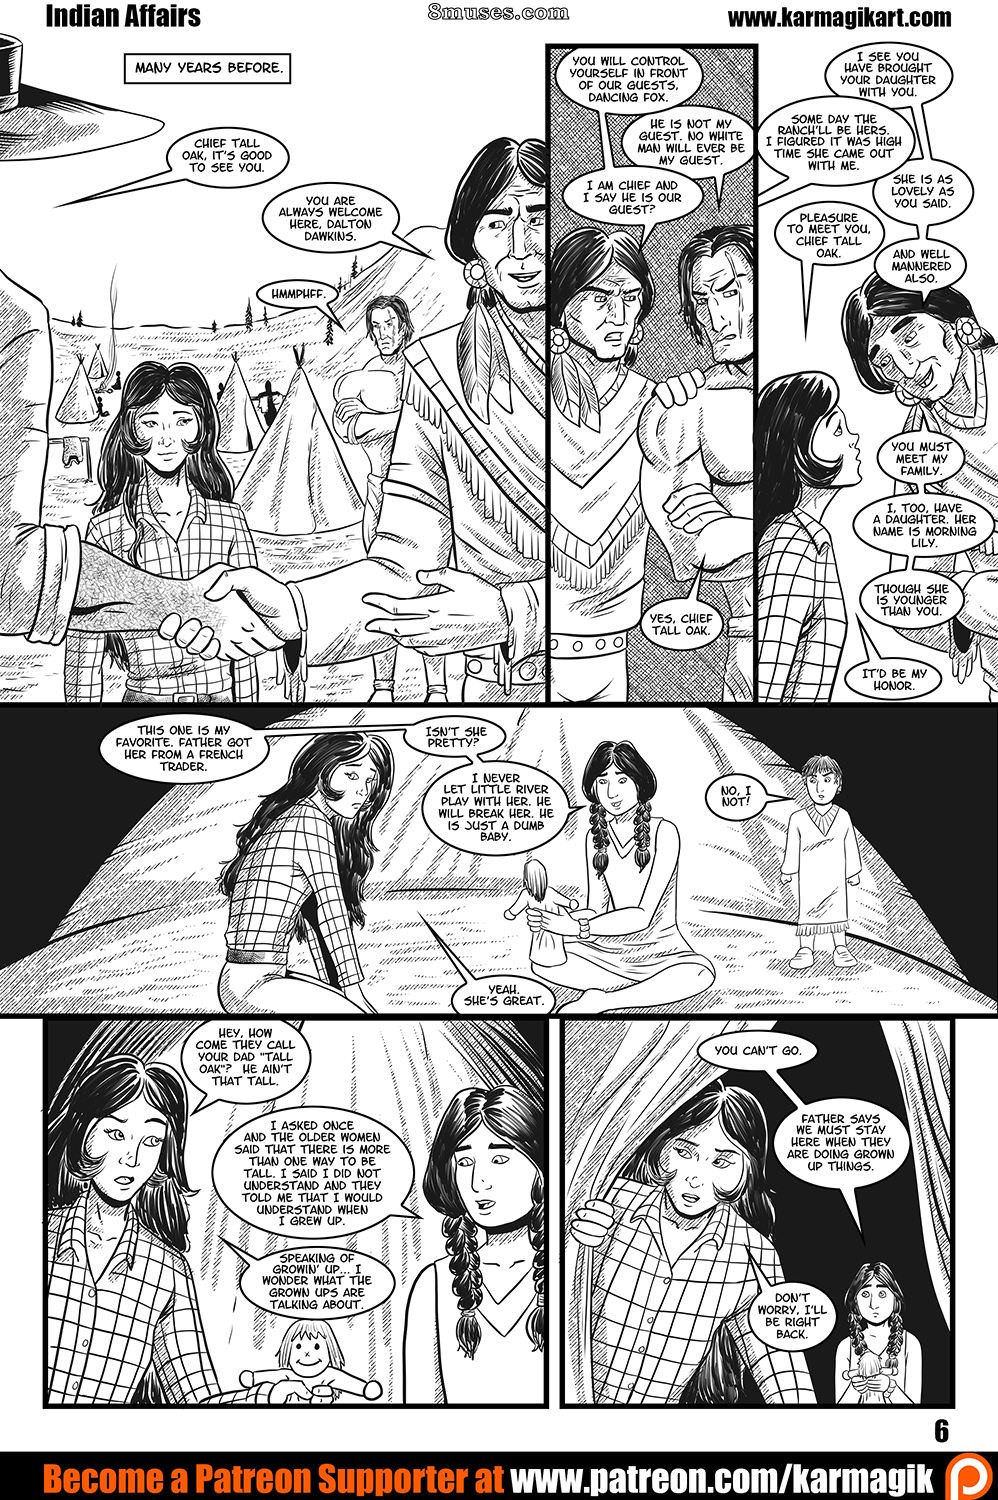 Indian Affairs Issue 1 - 8muses Comics photo